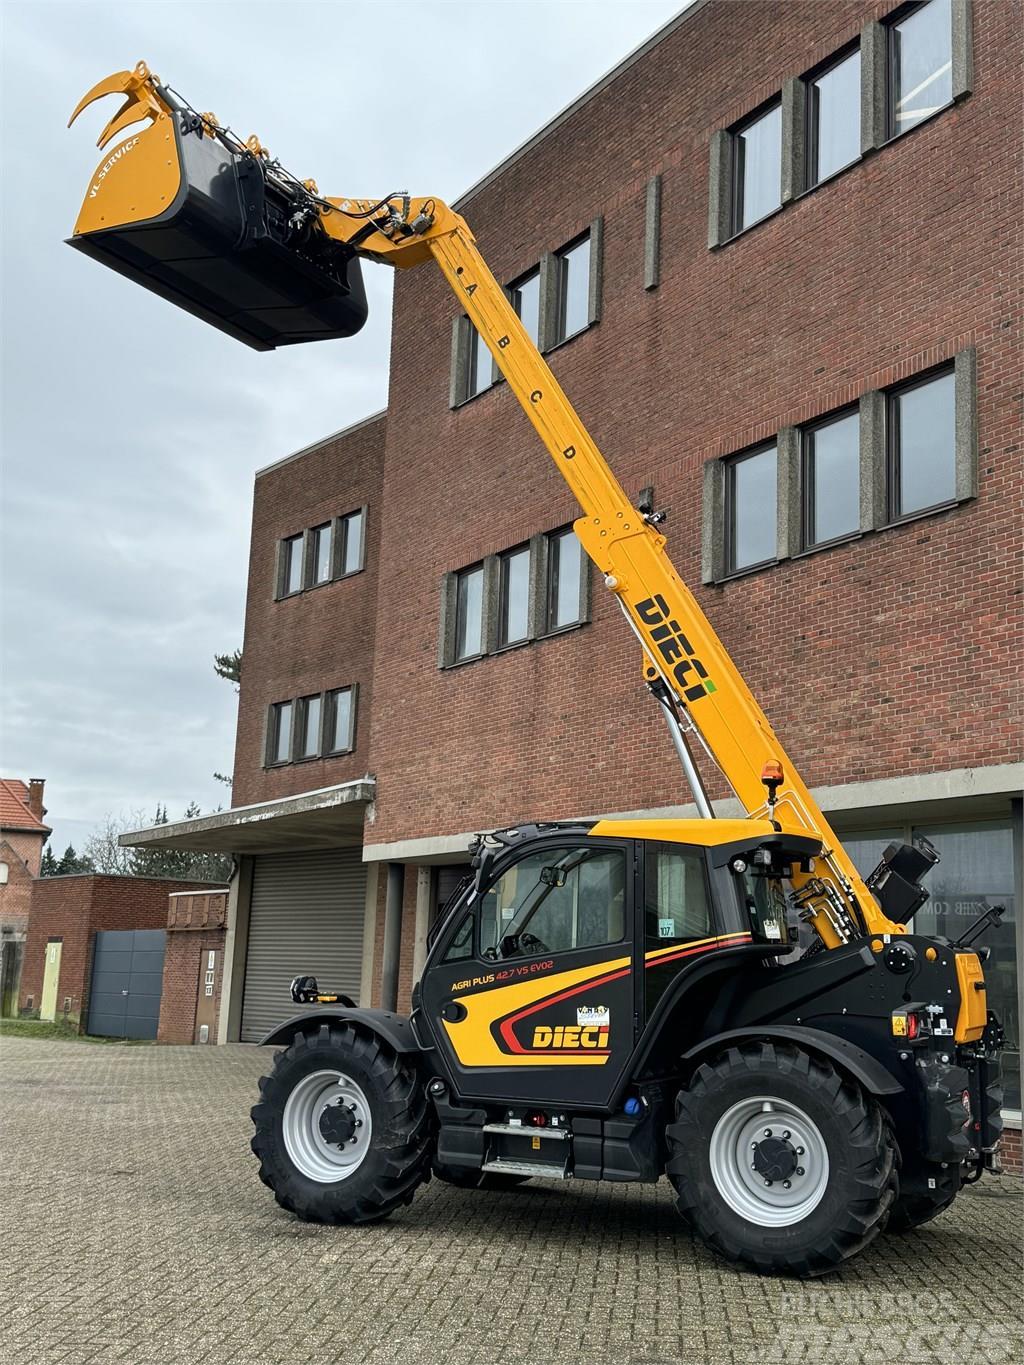 Dieci Agri plus 42.7 Telehandlers for agriculture